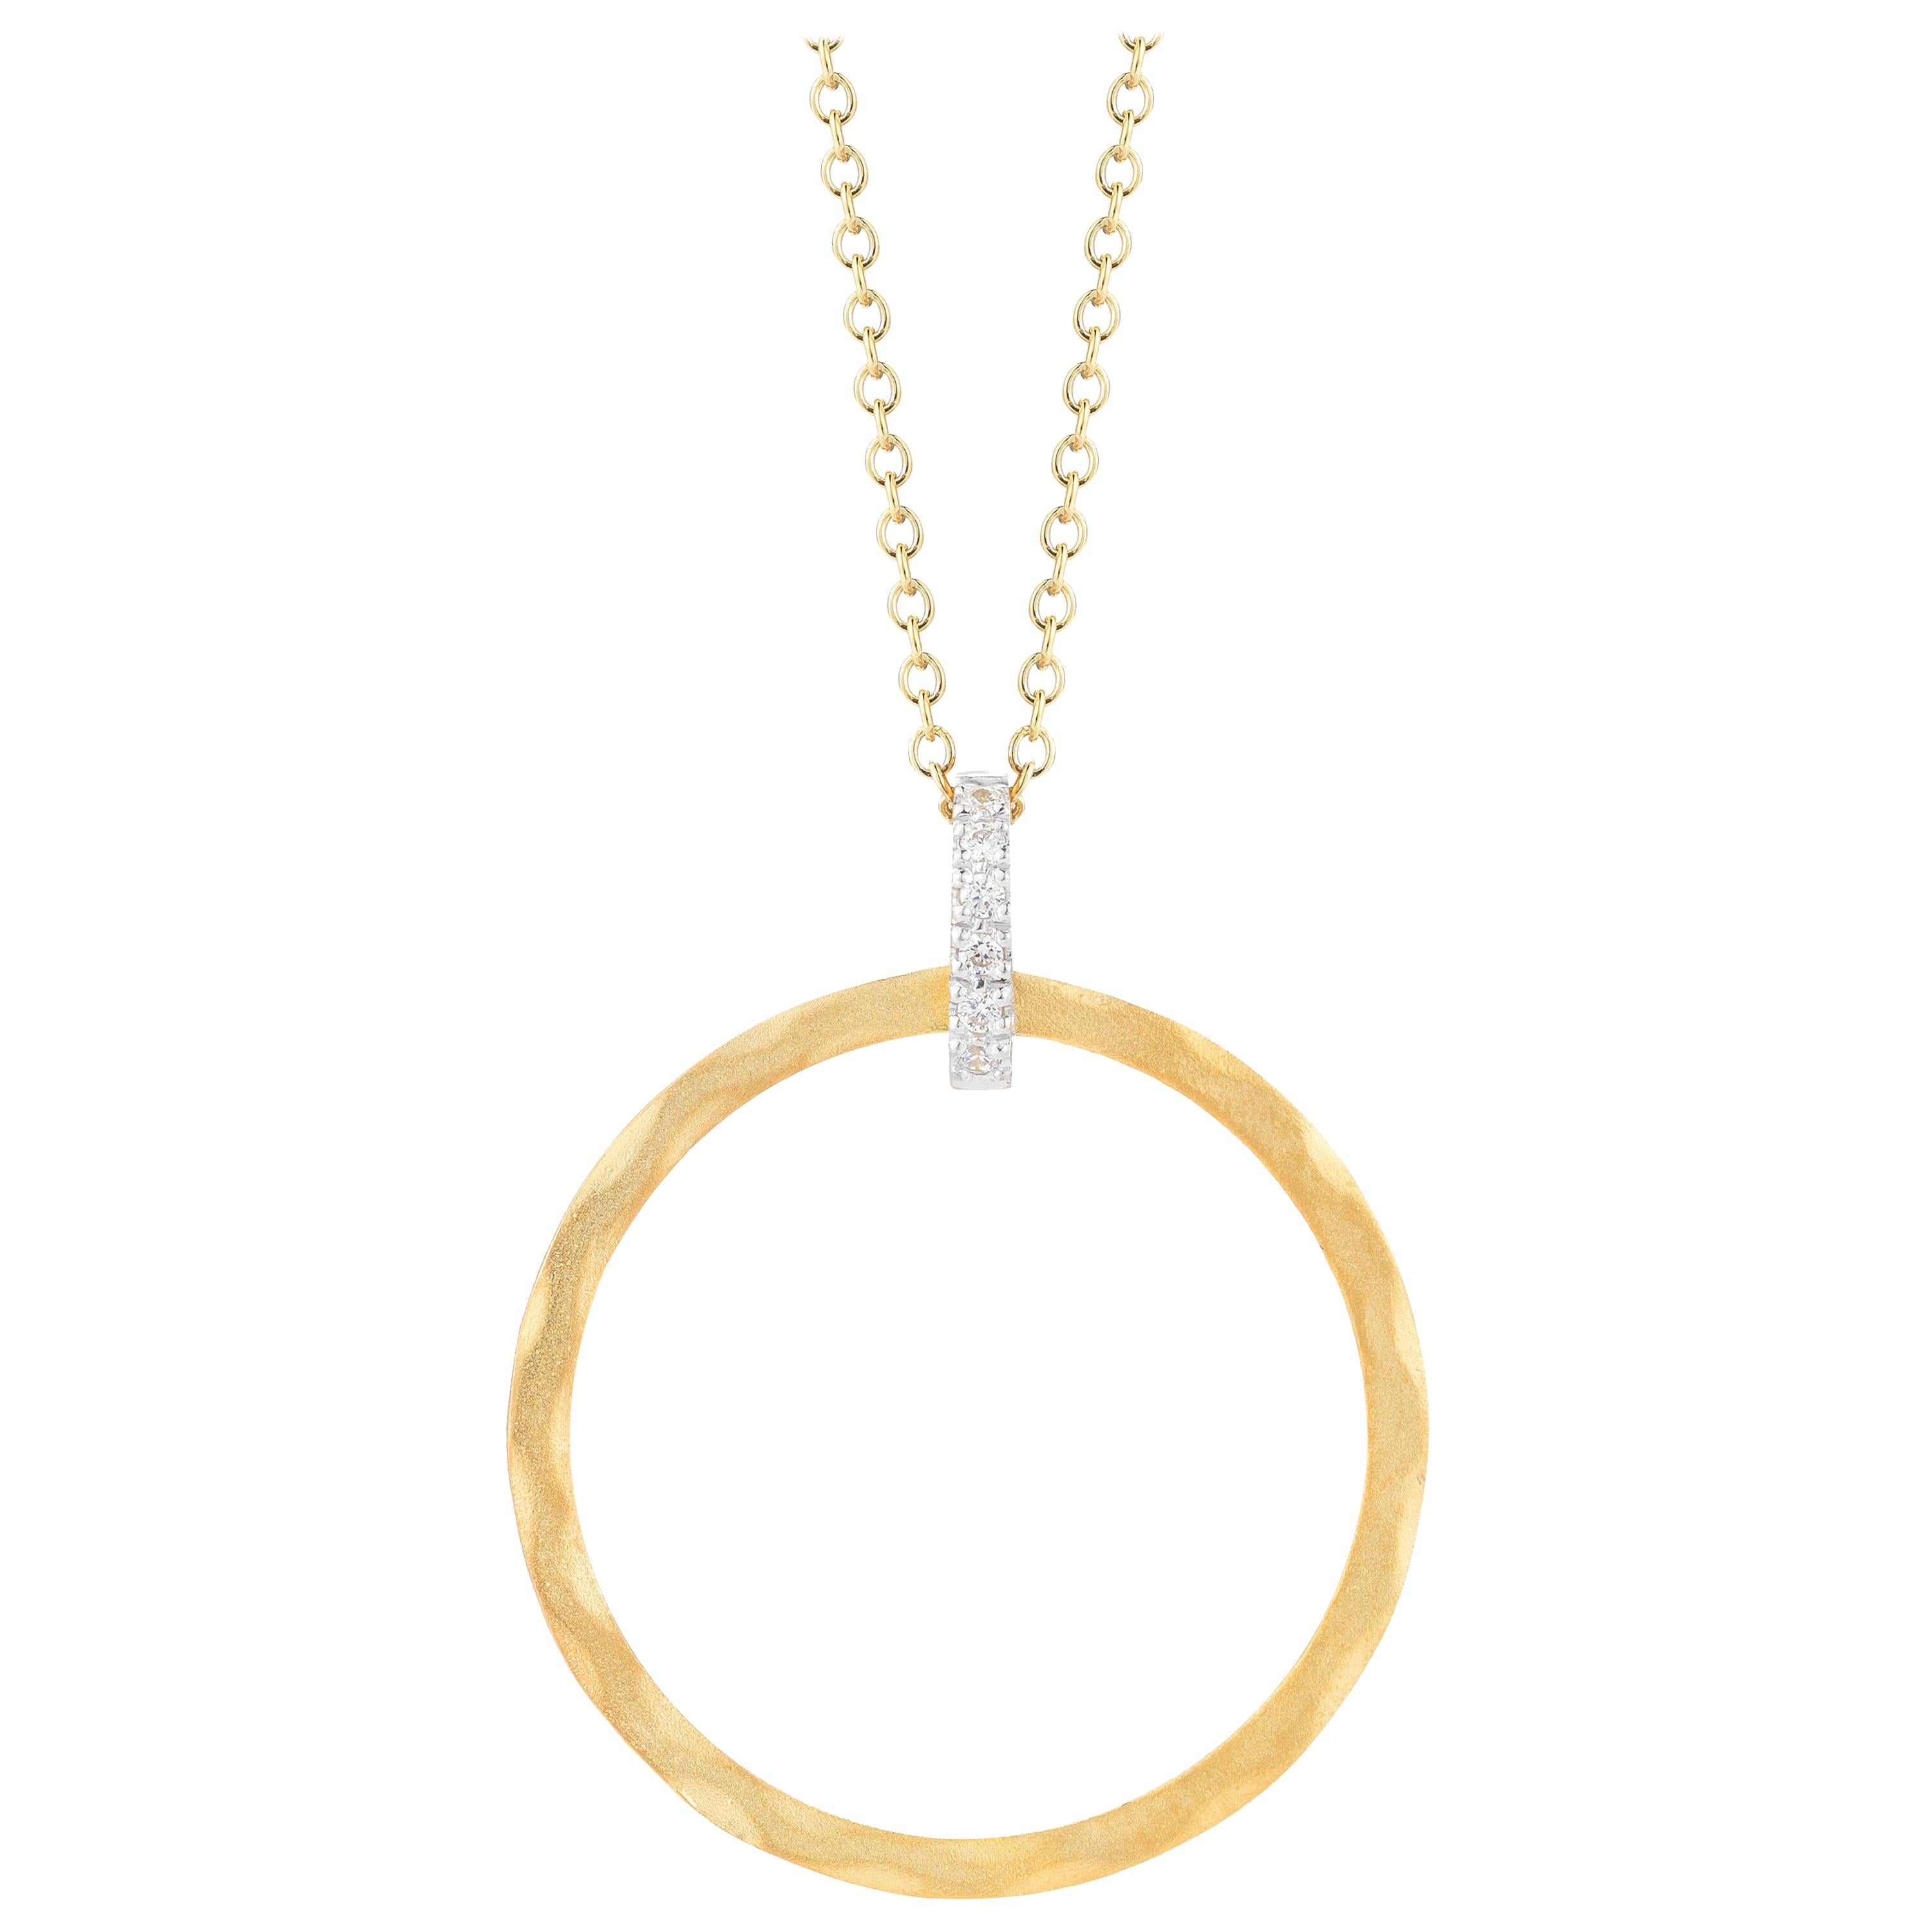 Handcrafted 14 Karat Yellow Gold Hammered Open Circle Pendant